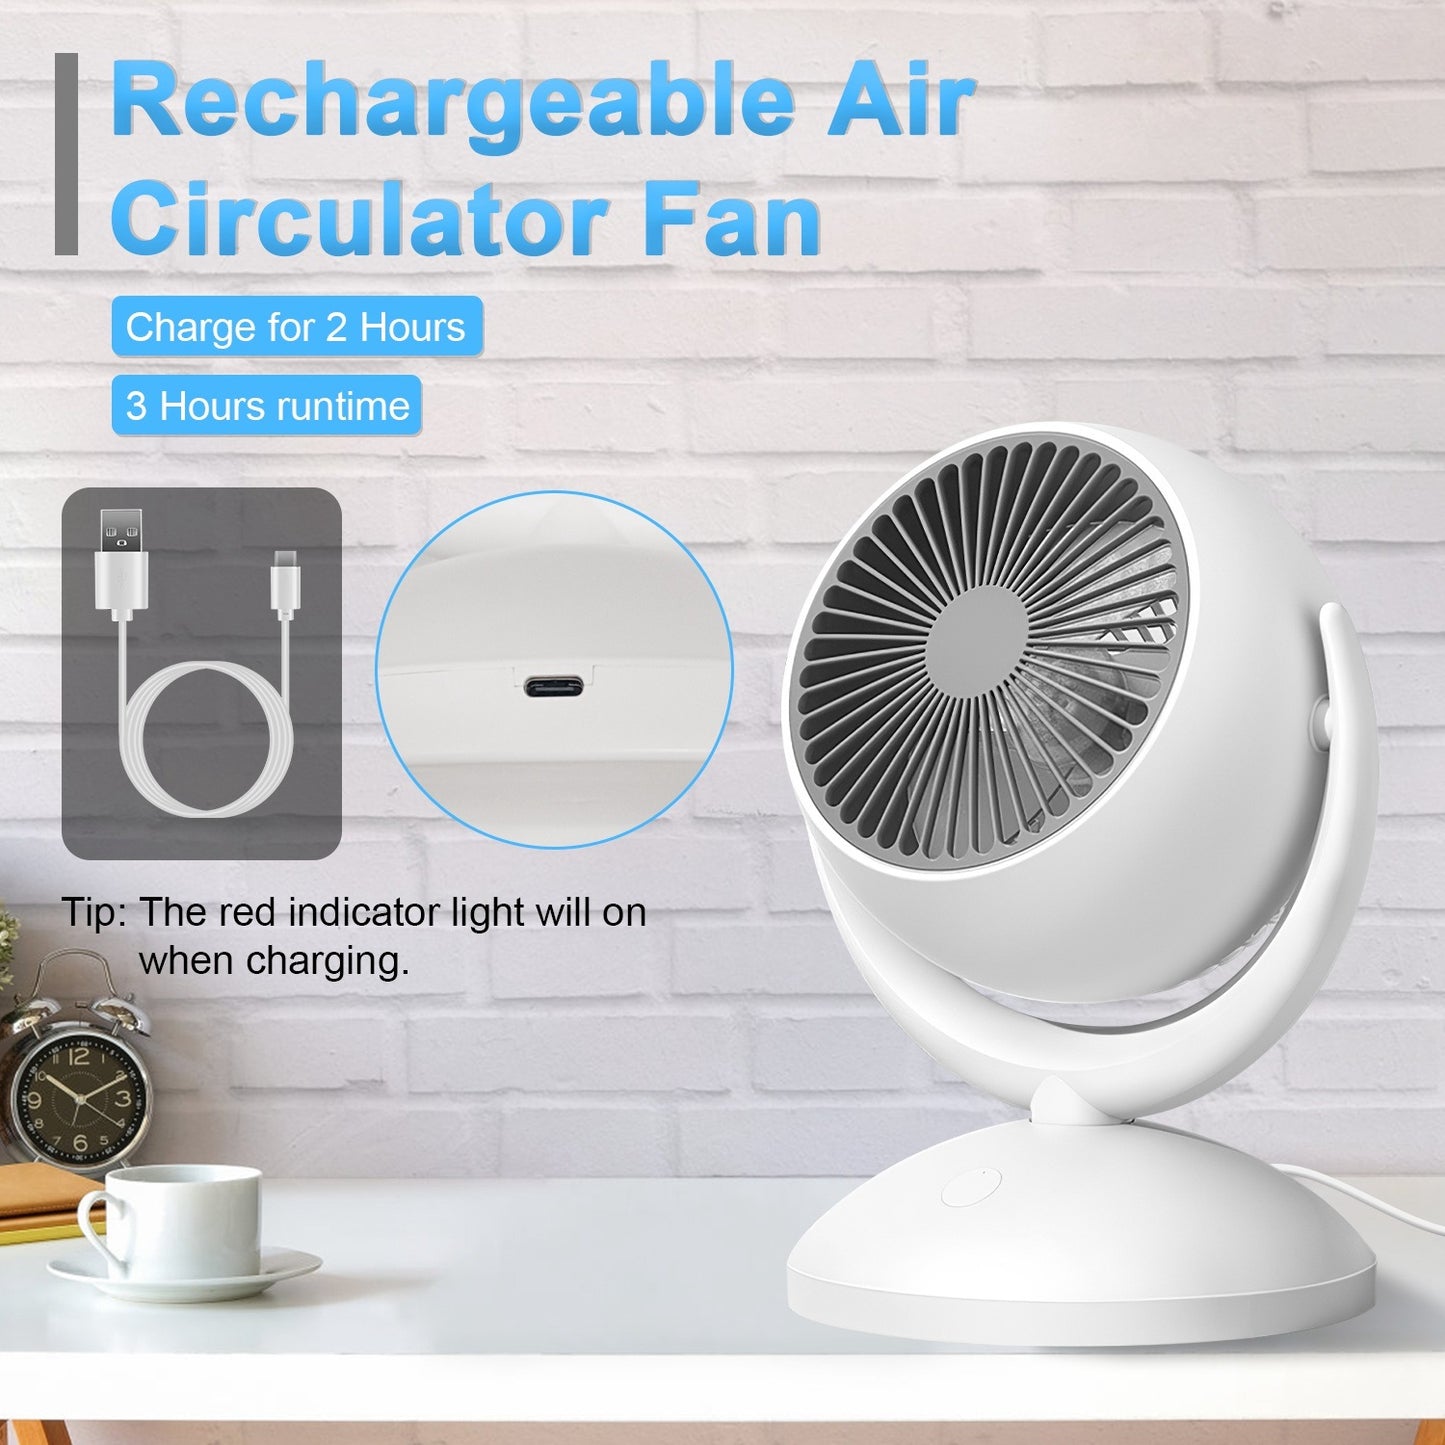 Air Circulator Desk Fan Portable Desktop Rechargeable Oscillating Fan with 4 Speeds 360 Degree Tilt Head Automatic Rotation Quiet 40dB Table Fan for Home Office Bedroom